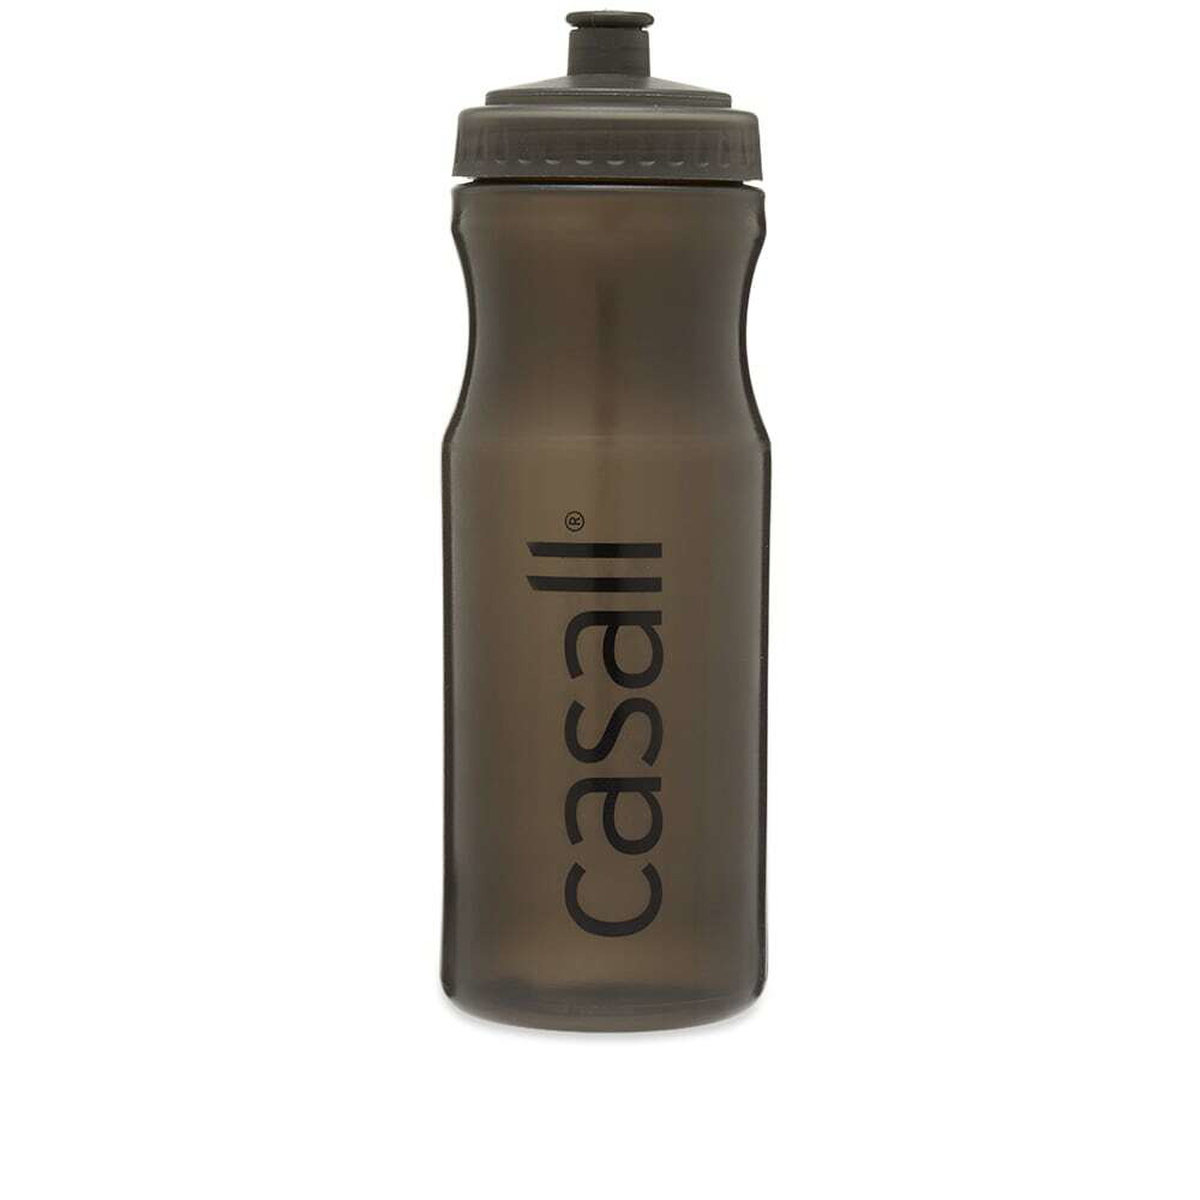 Casall Women's ECO Yoga Mat With Carry Strap in Black CASALL